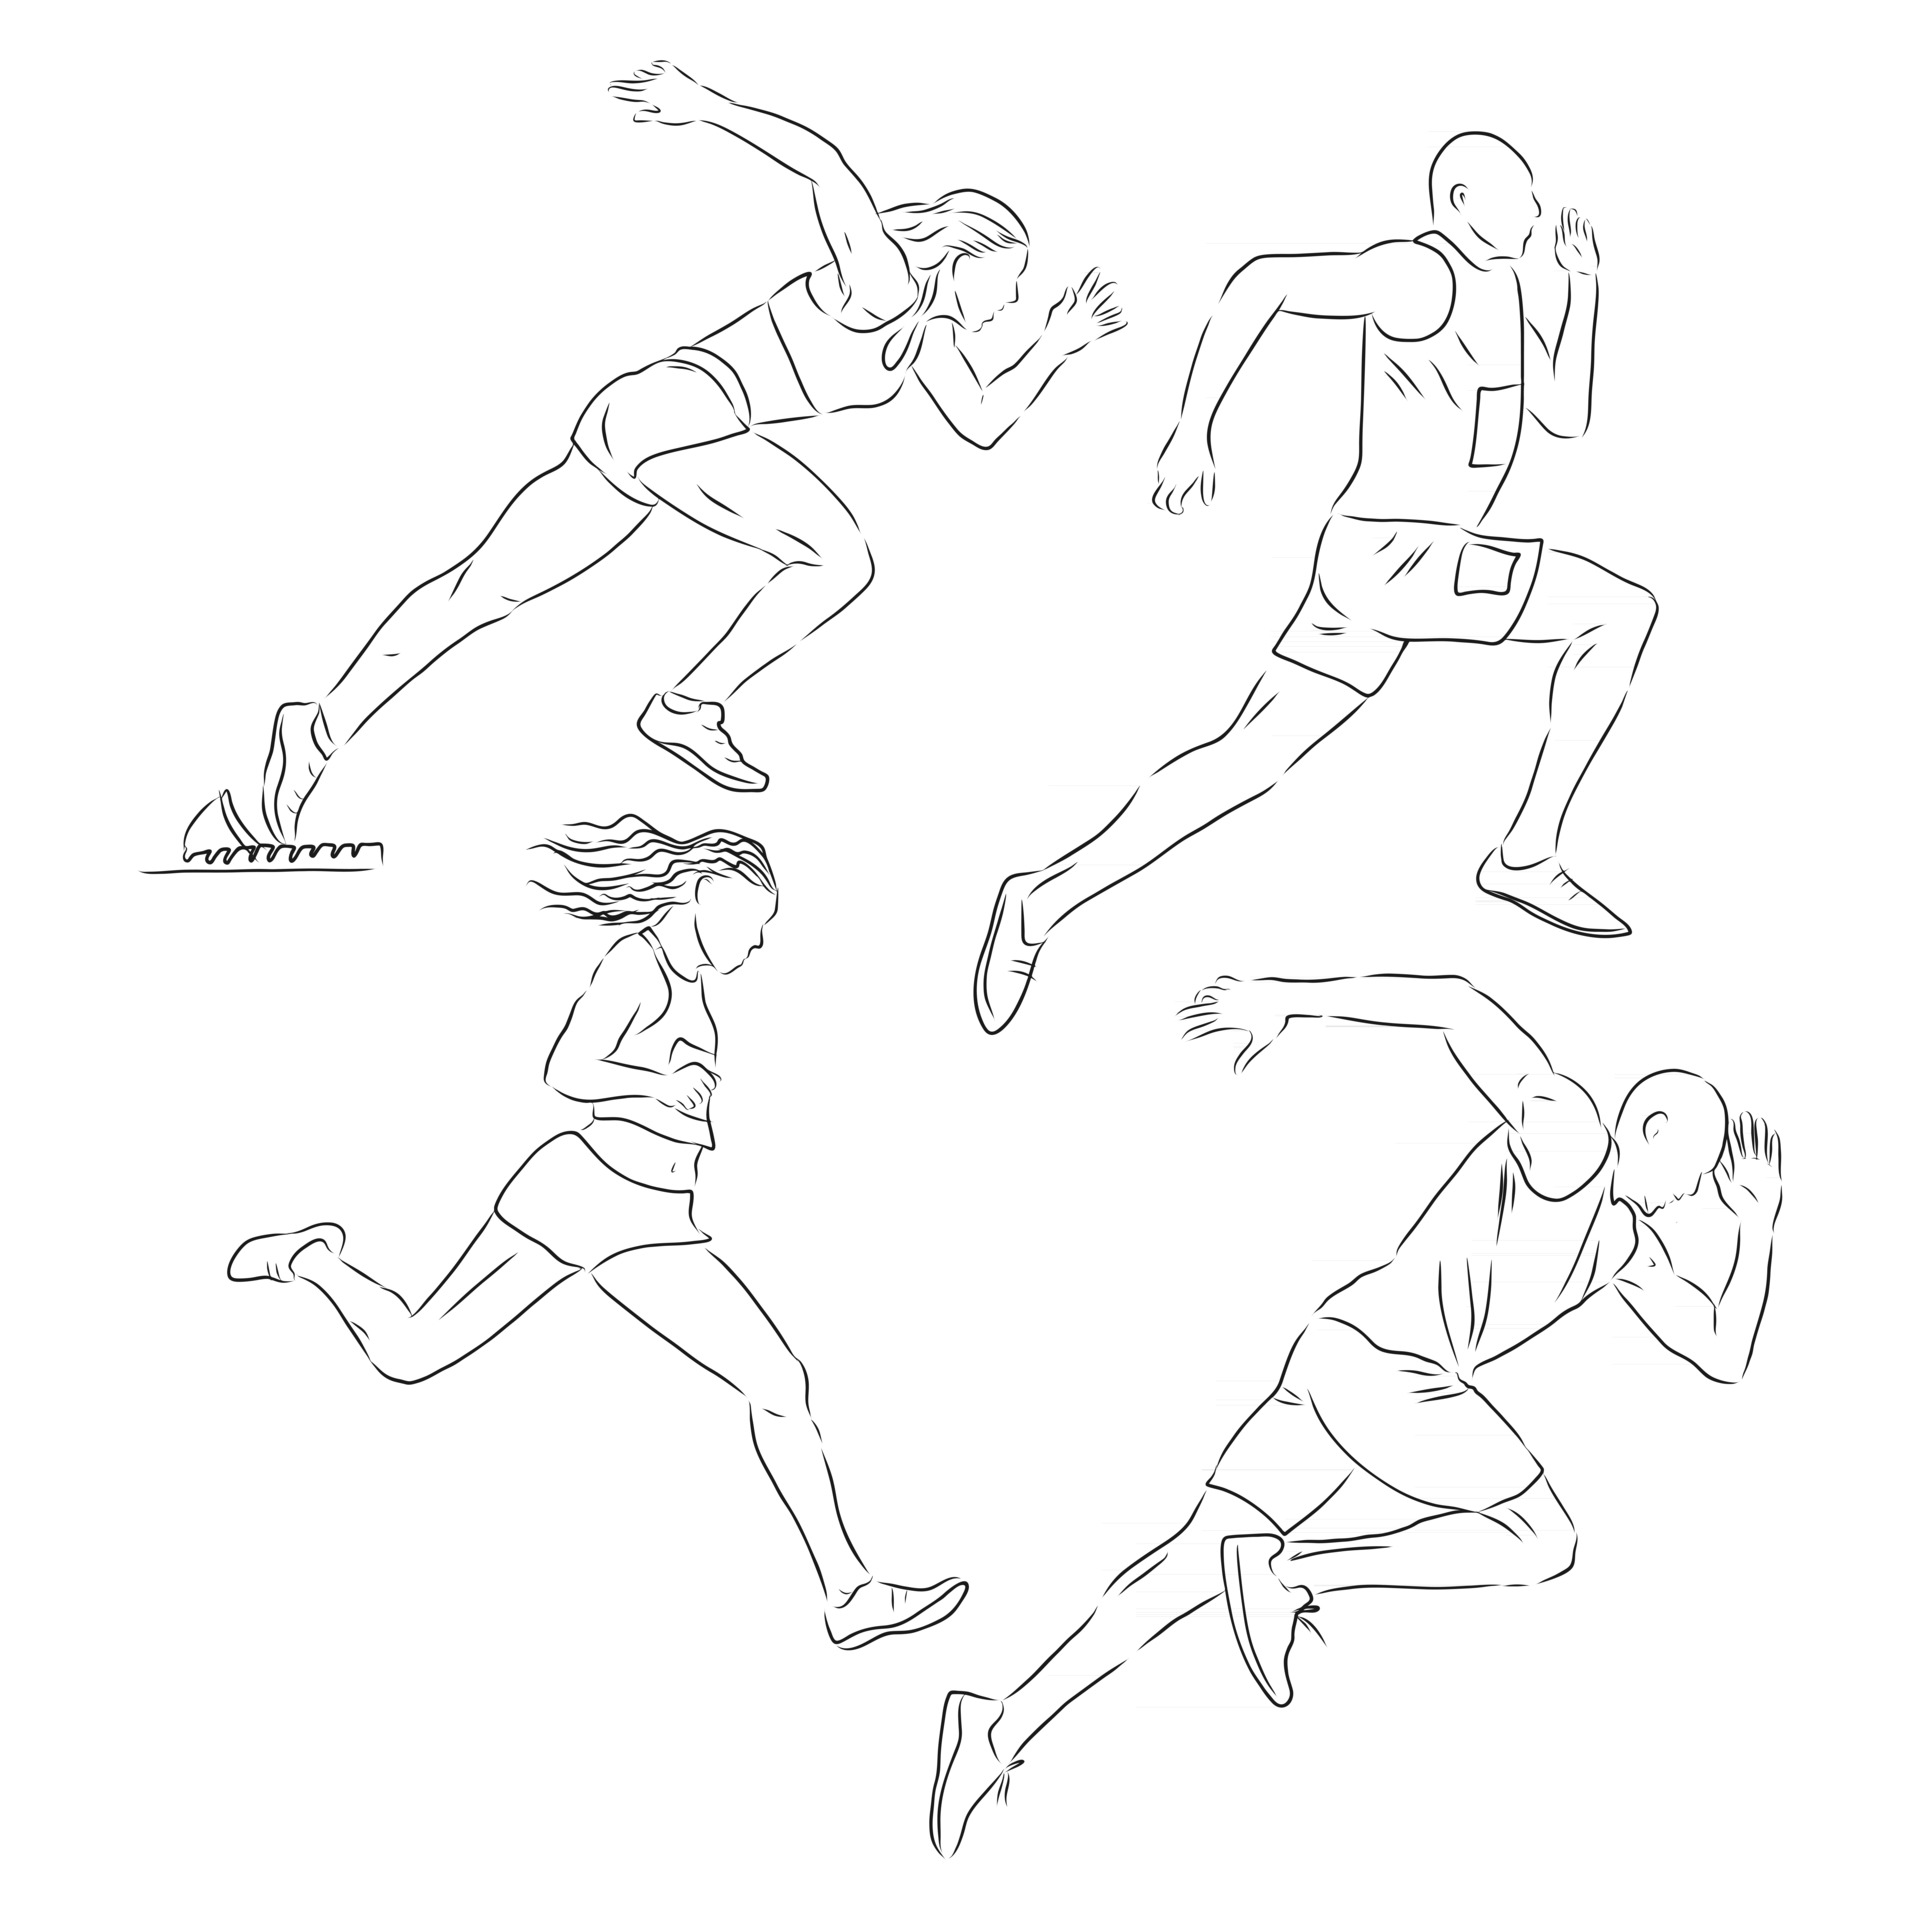 How to Draw a Person Running  Really Easy Drawing Tutorial